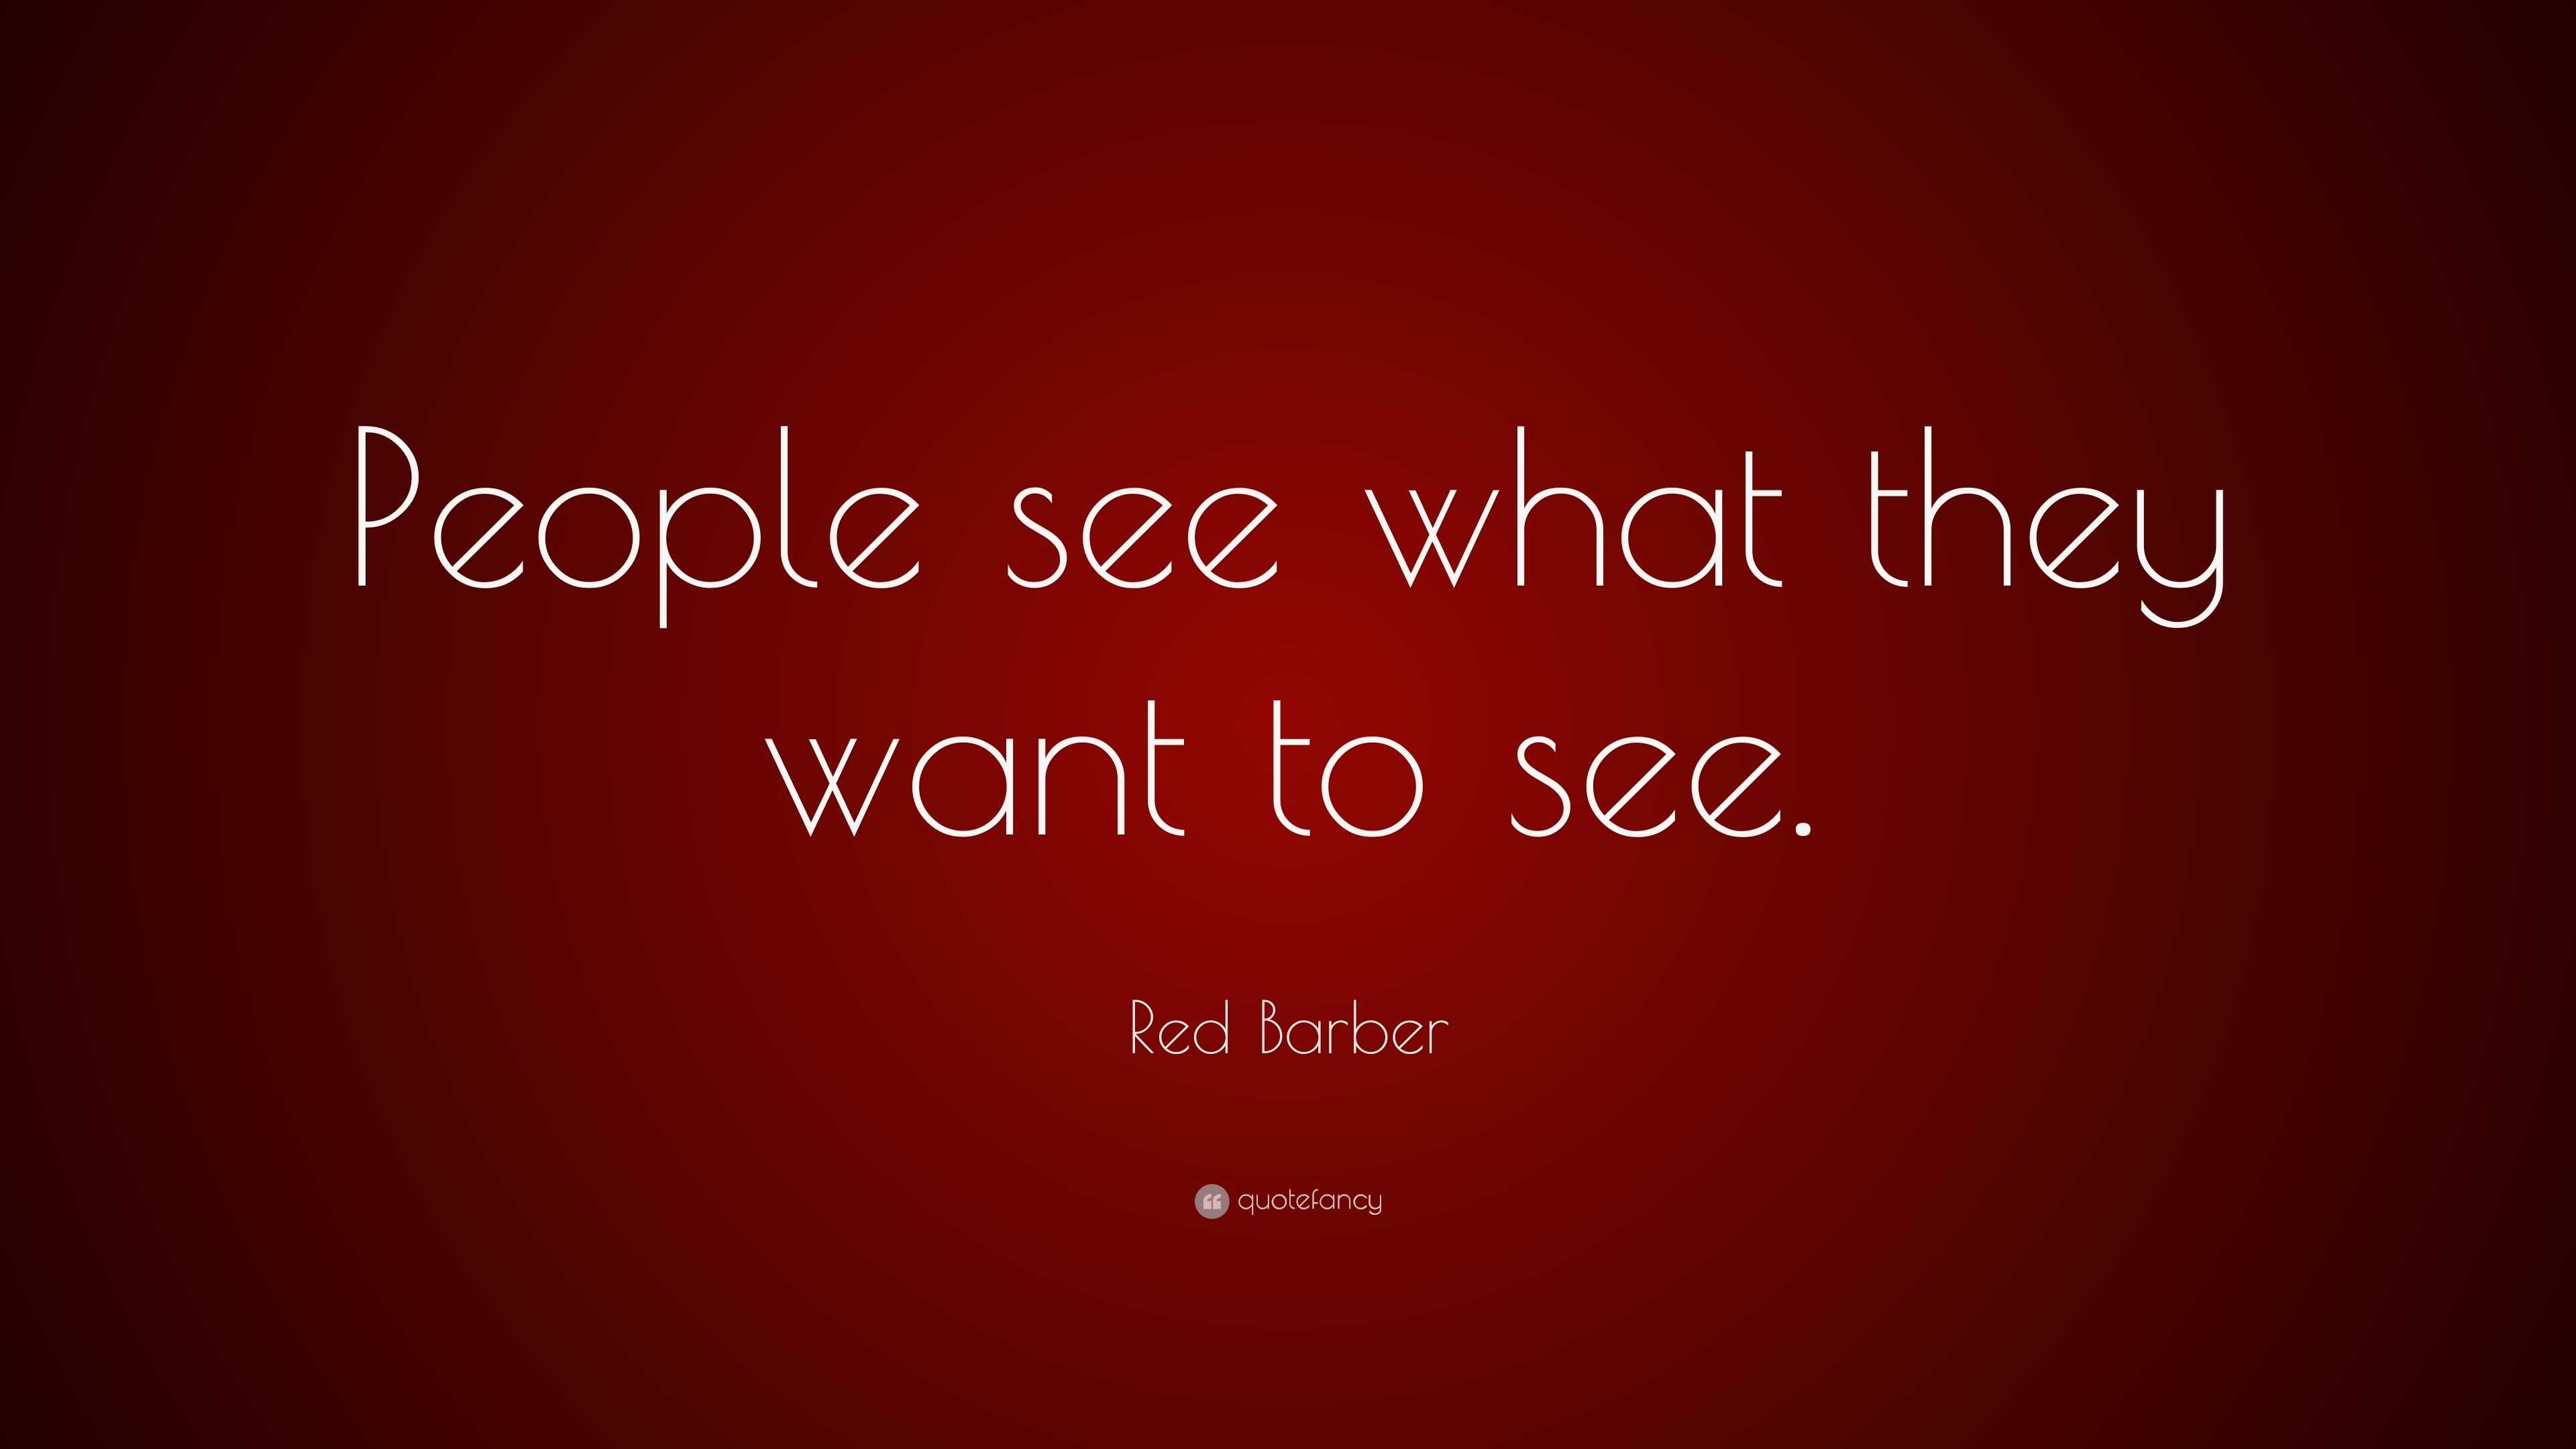 Red Barber Quote: “People see what they want to see.”